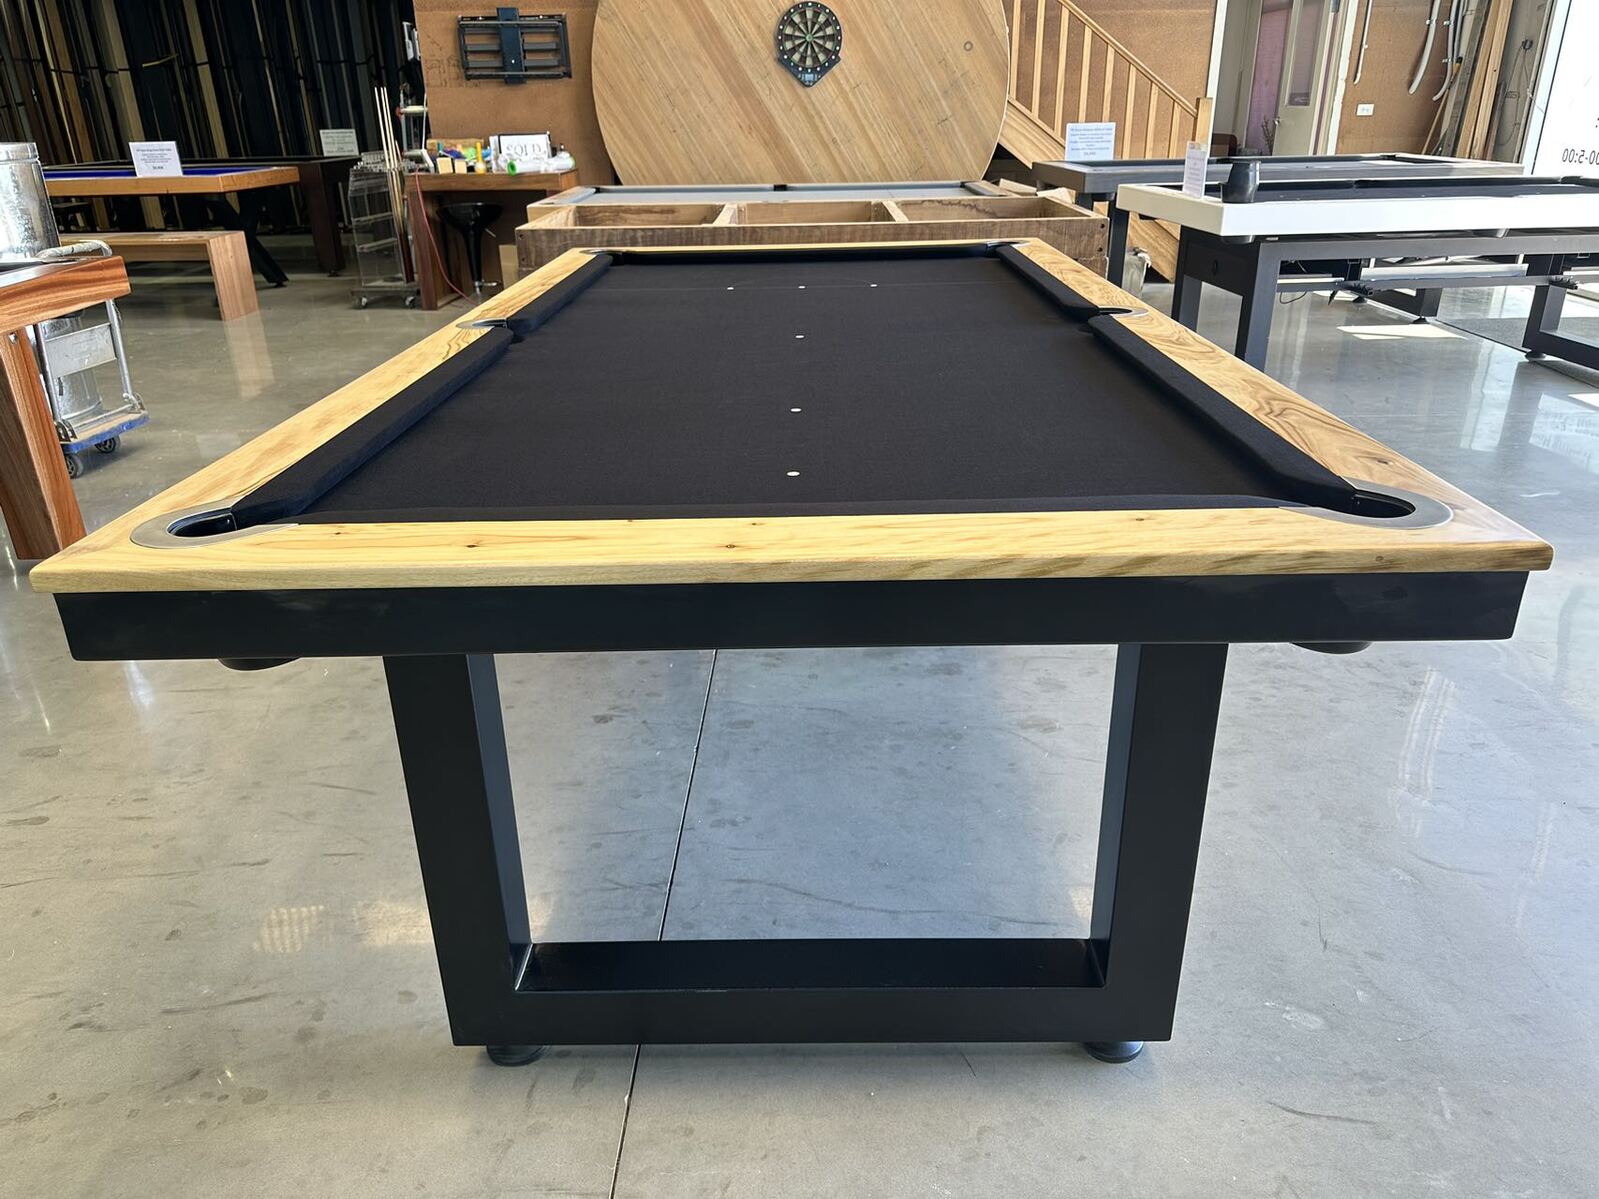 Pre-made 8 Foot Slate Odyssey Pool Billiards Table, camphor timber